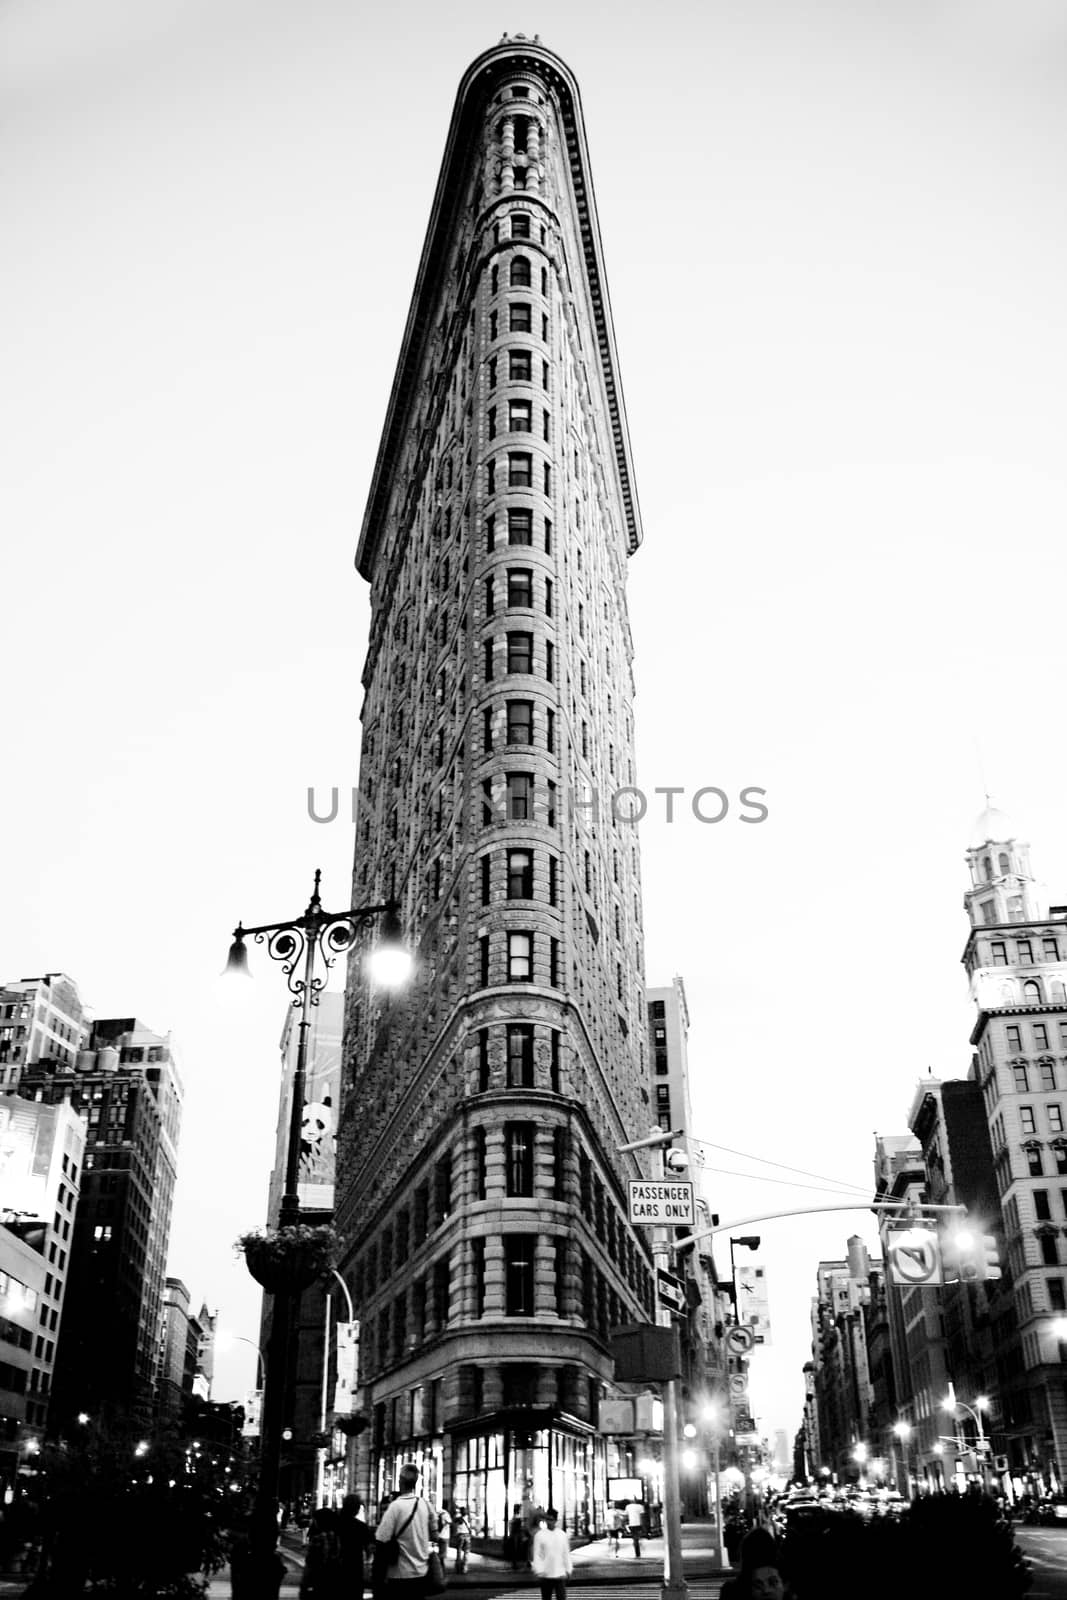 The Flatiron Building, or Fuller Building as it was originally called, is located at 175 Fifth Avenue in the borough of Manhattan